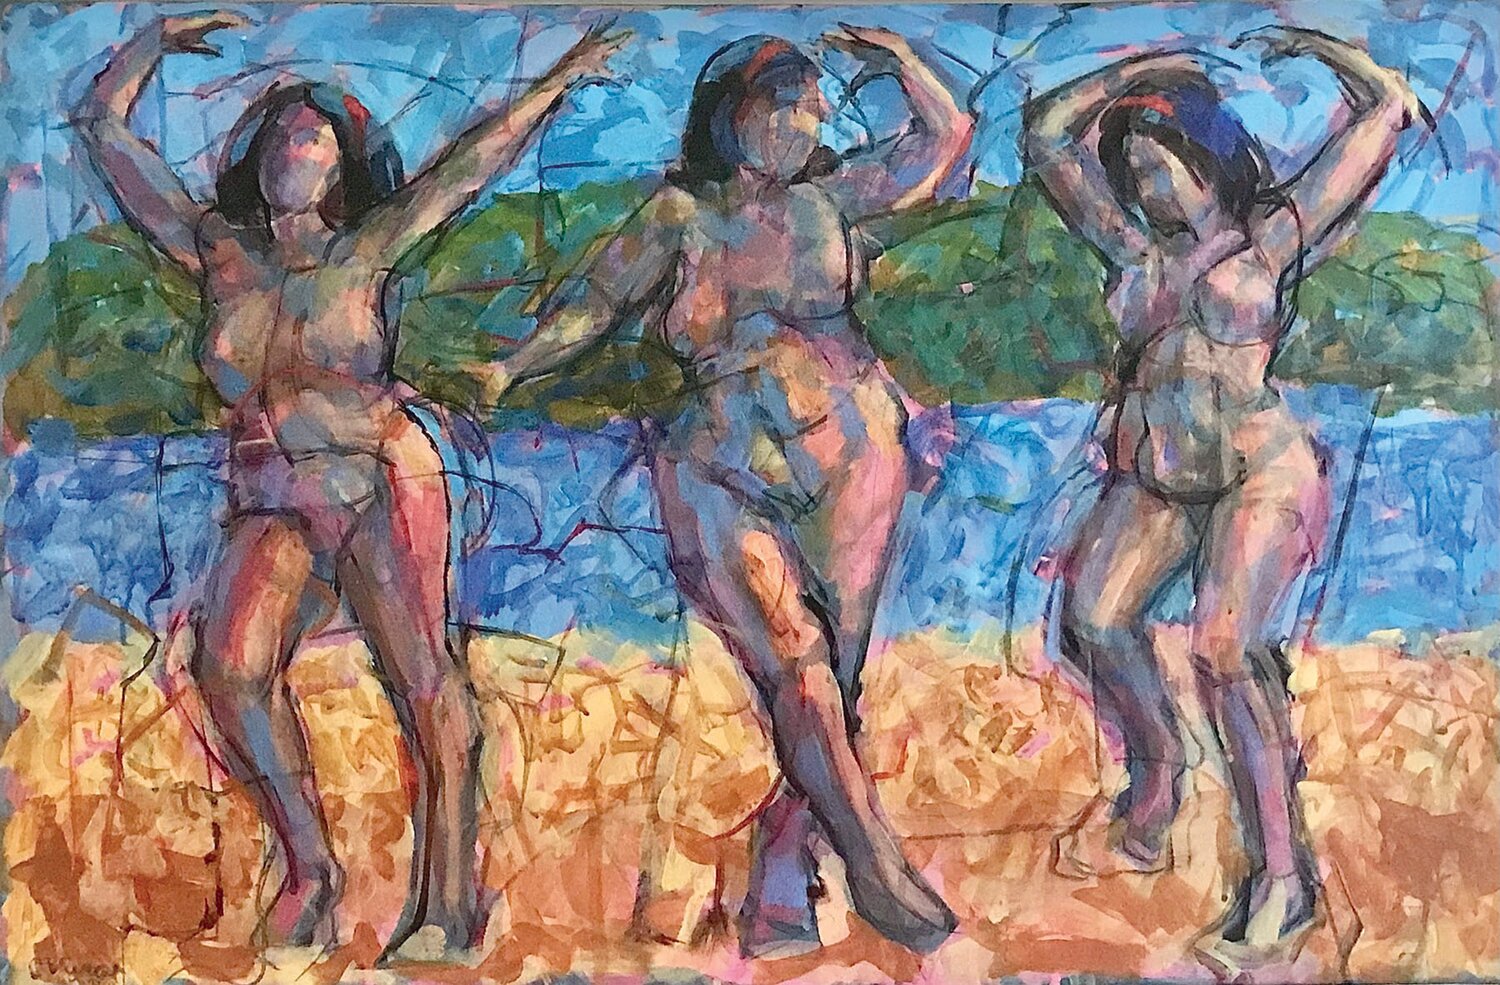 “Dance of the Three Graces: Forrest” is an acrylic by Charles David Viera.